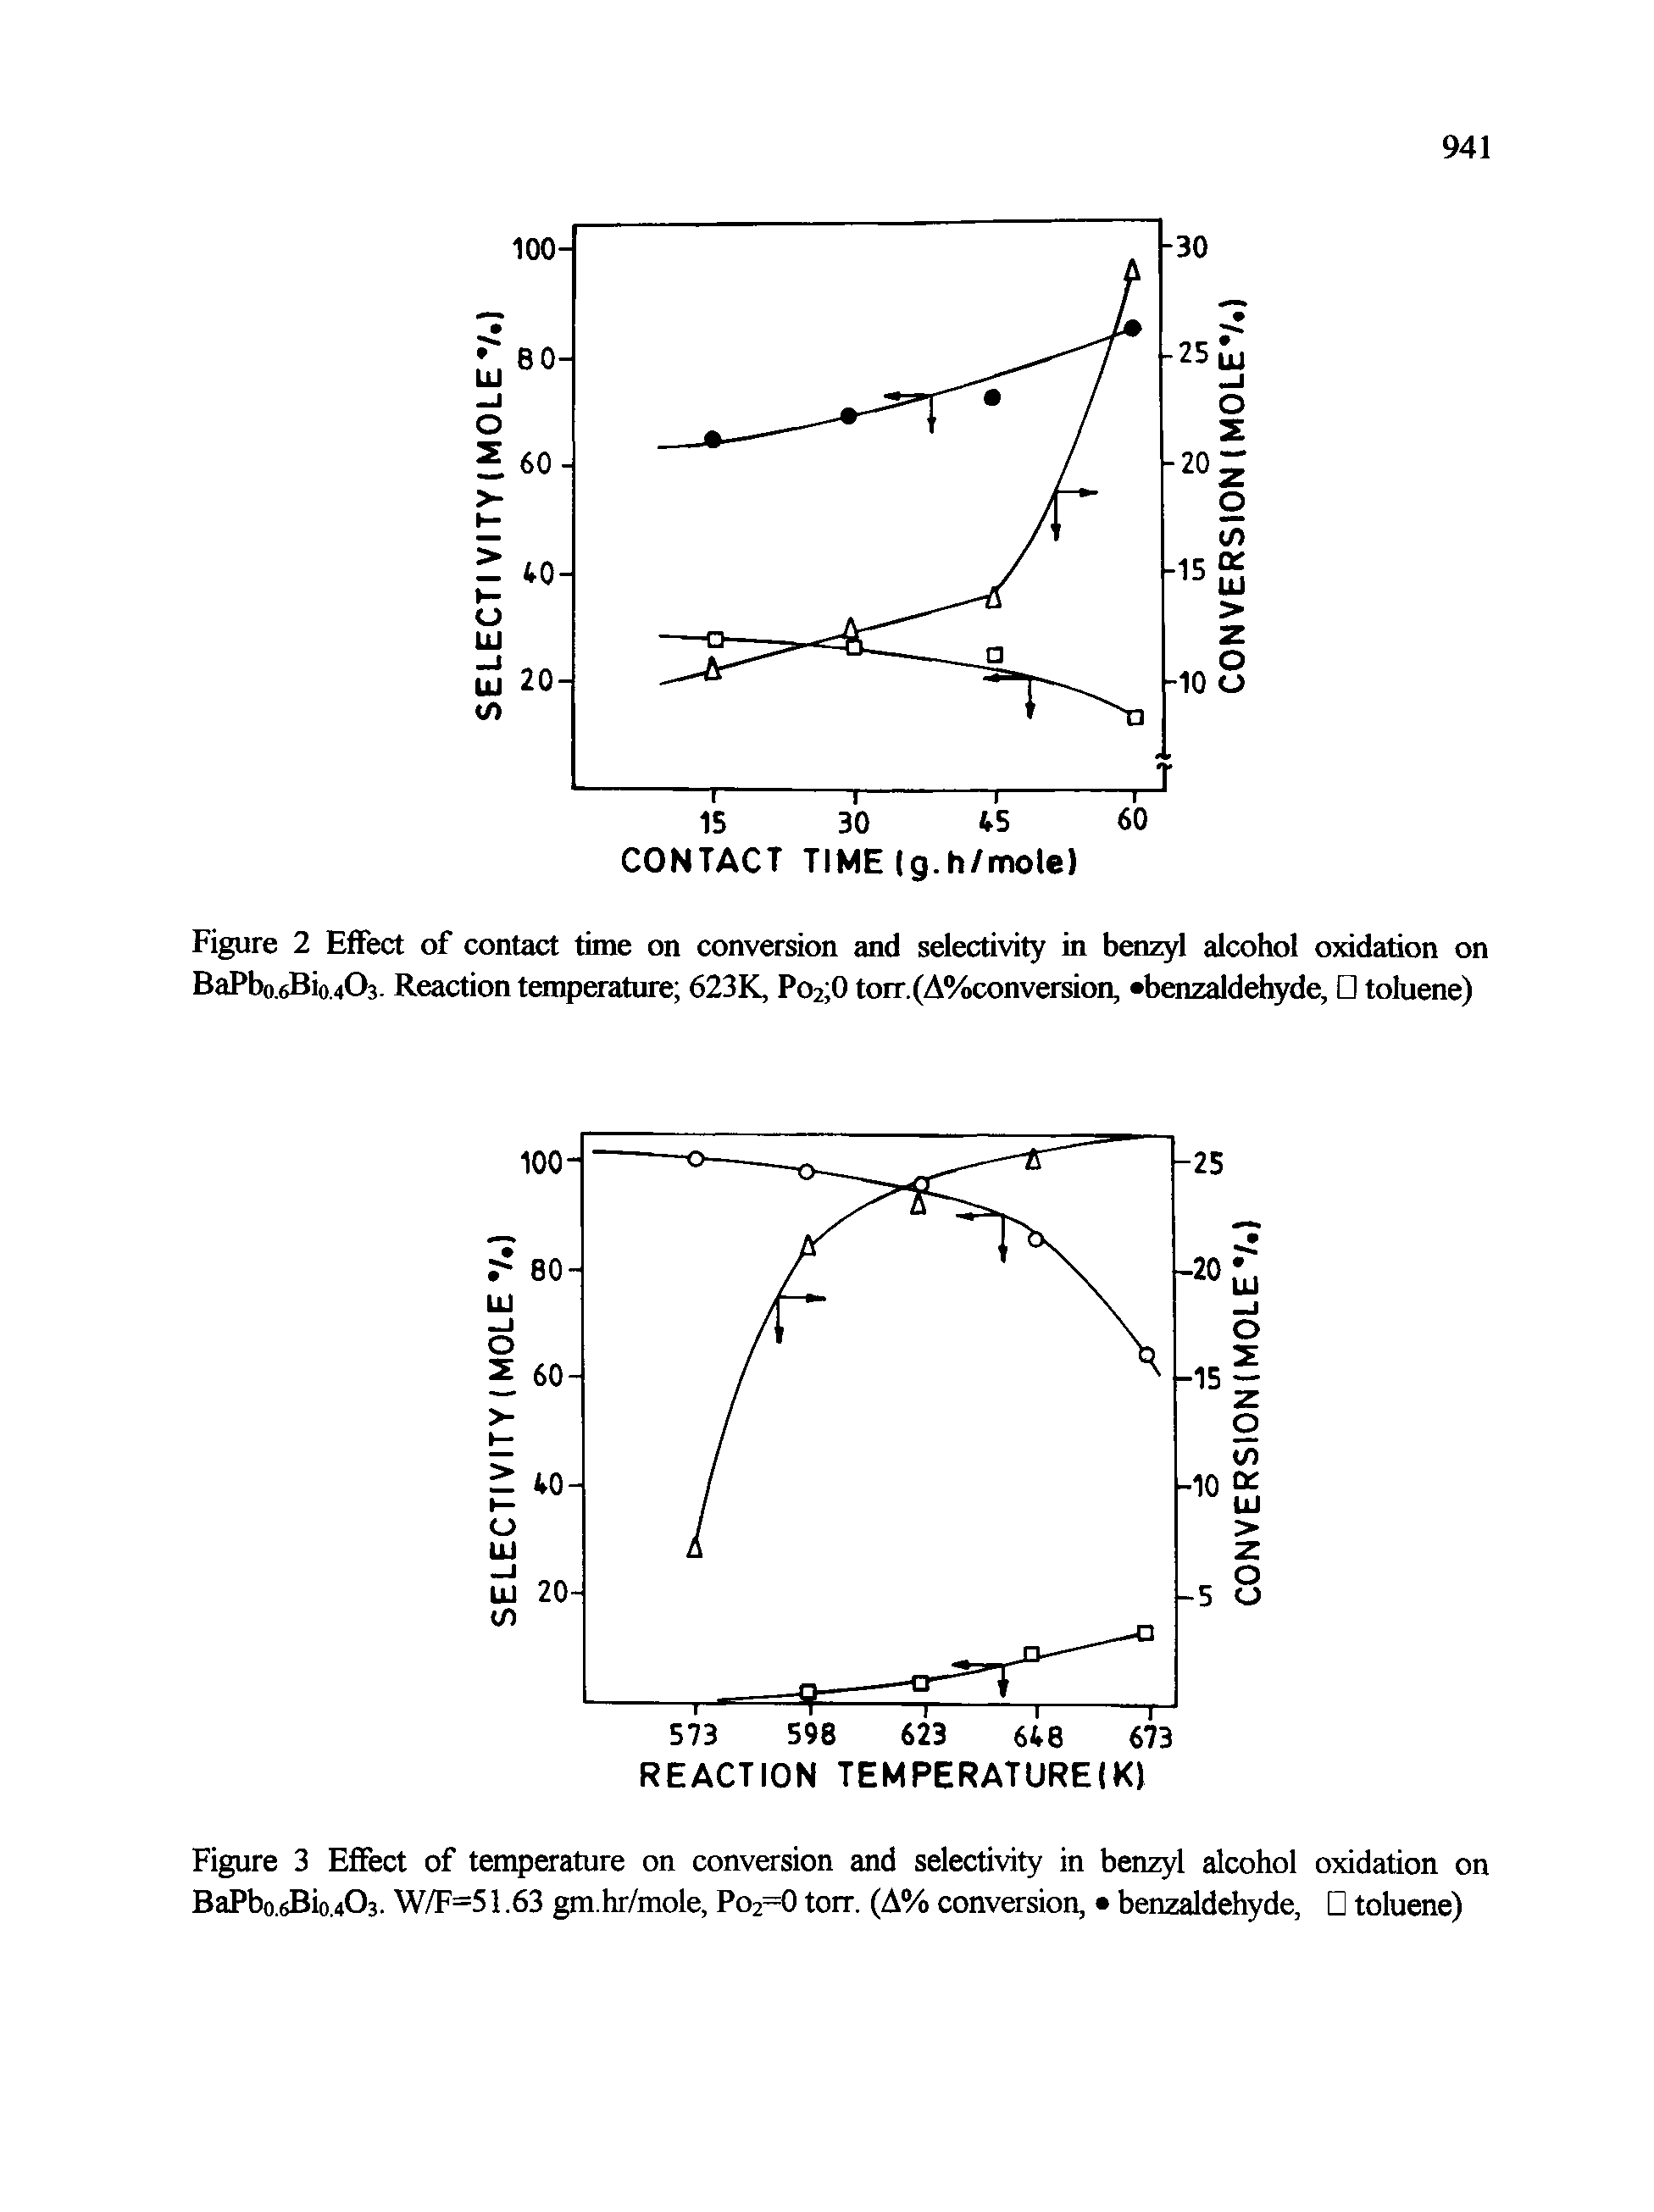 Figure 3 Effect of temperature on conversion and selectivity in benzyl alcohol oxidation on BaPbo.6Bio.4O3. W/F=51.63 gm.hr/mole, Po2=0 torr. (A% conversion, benzaldehyde, toluene)...